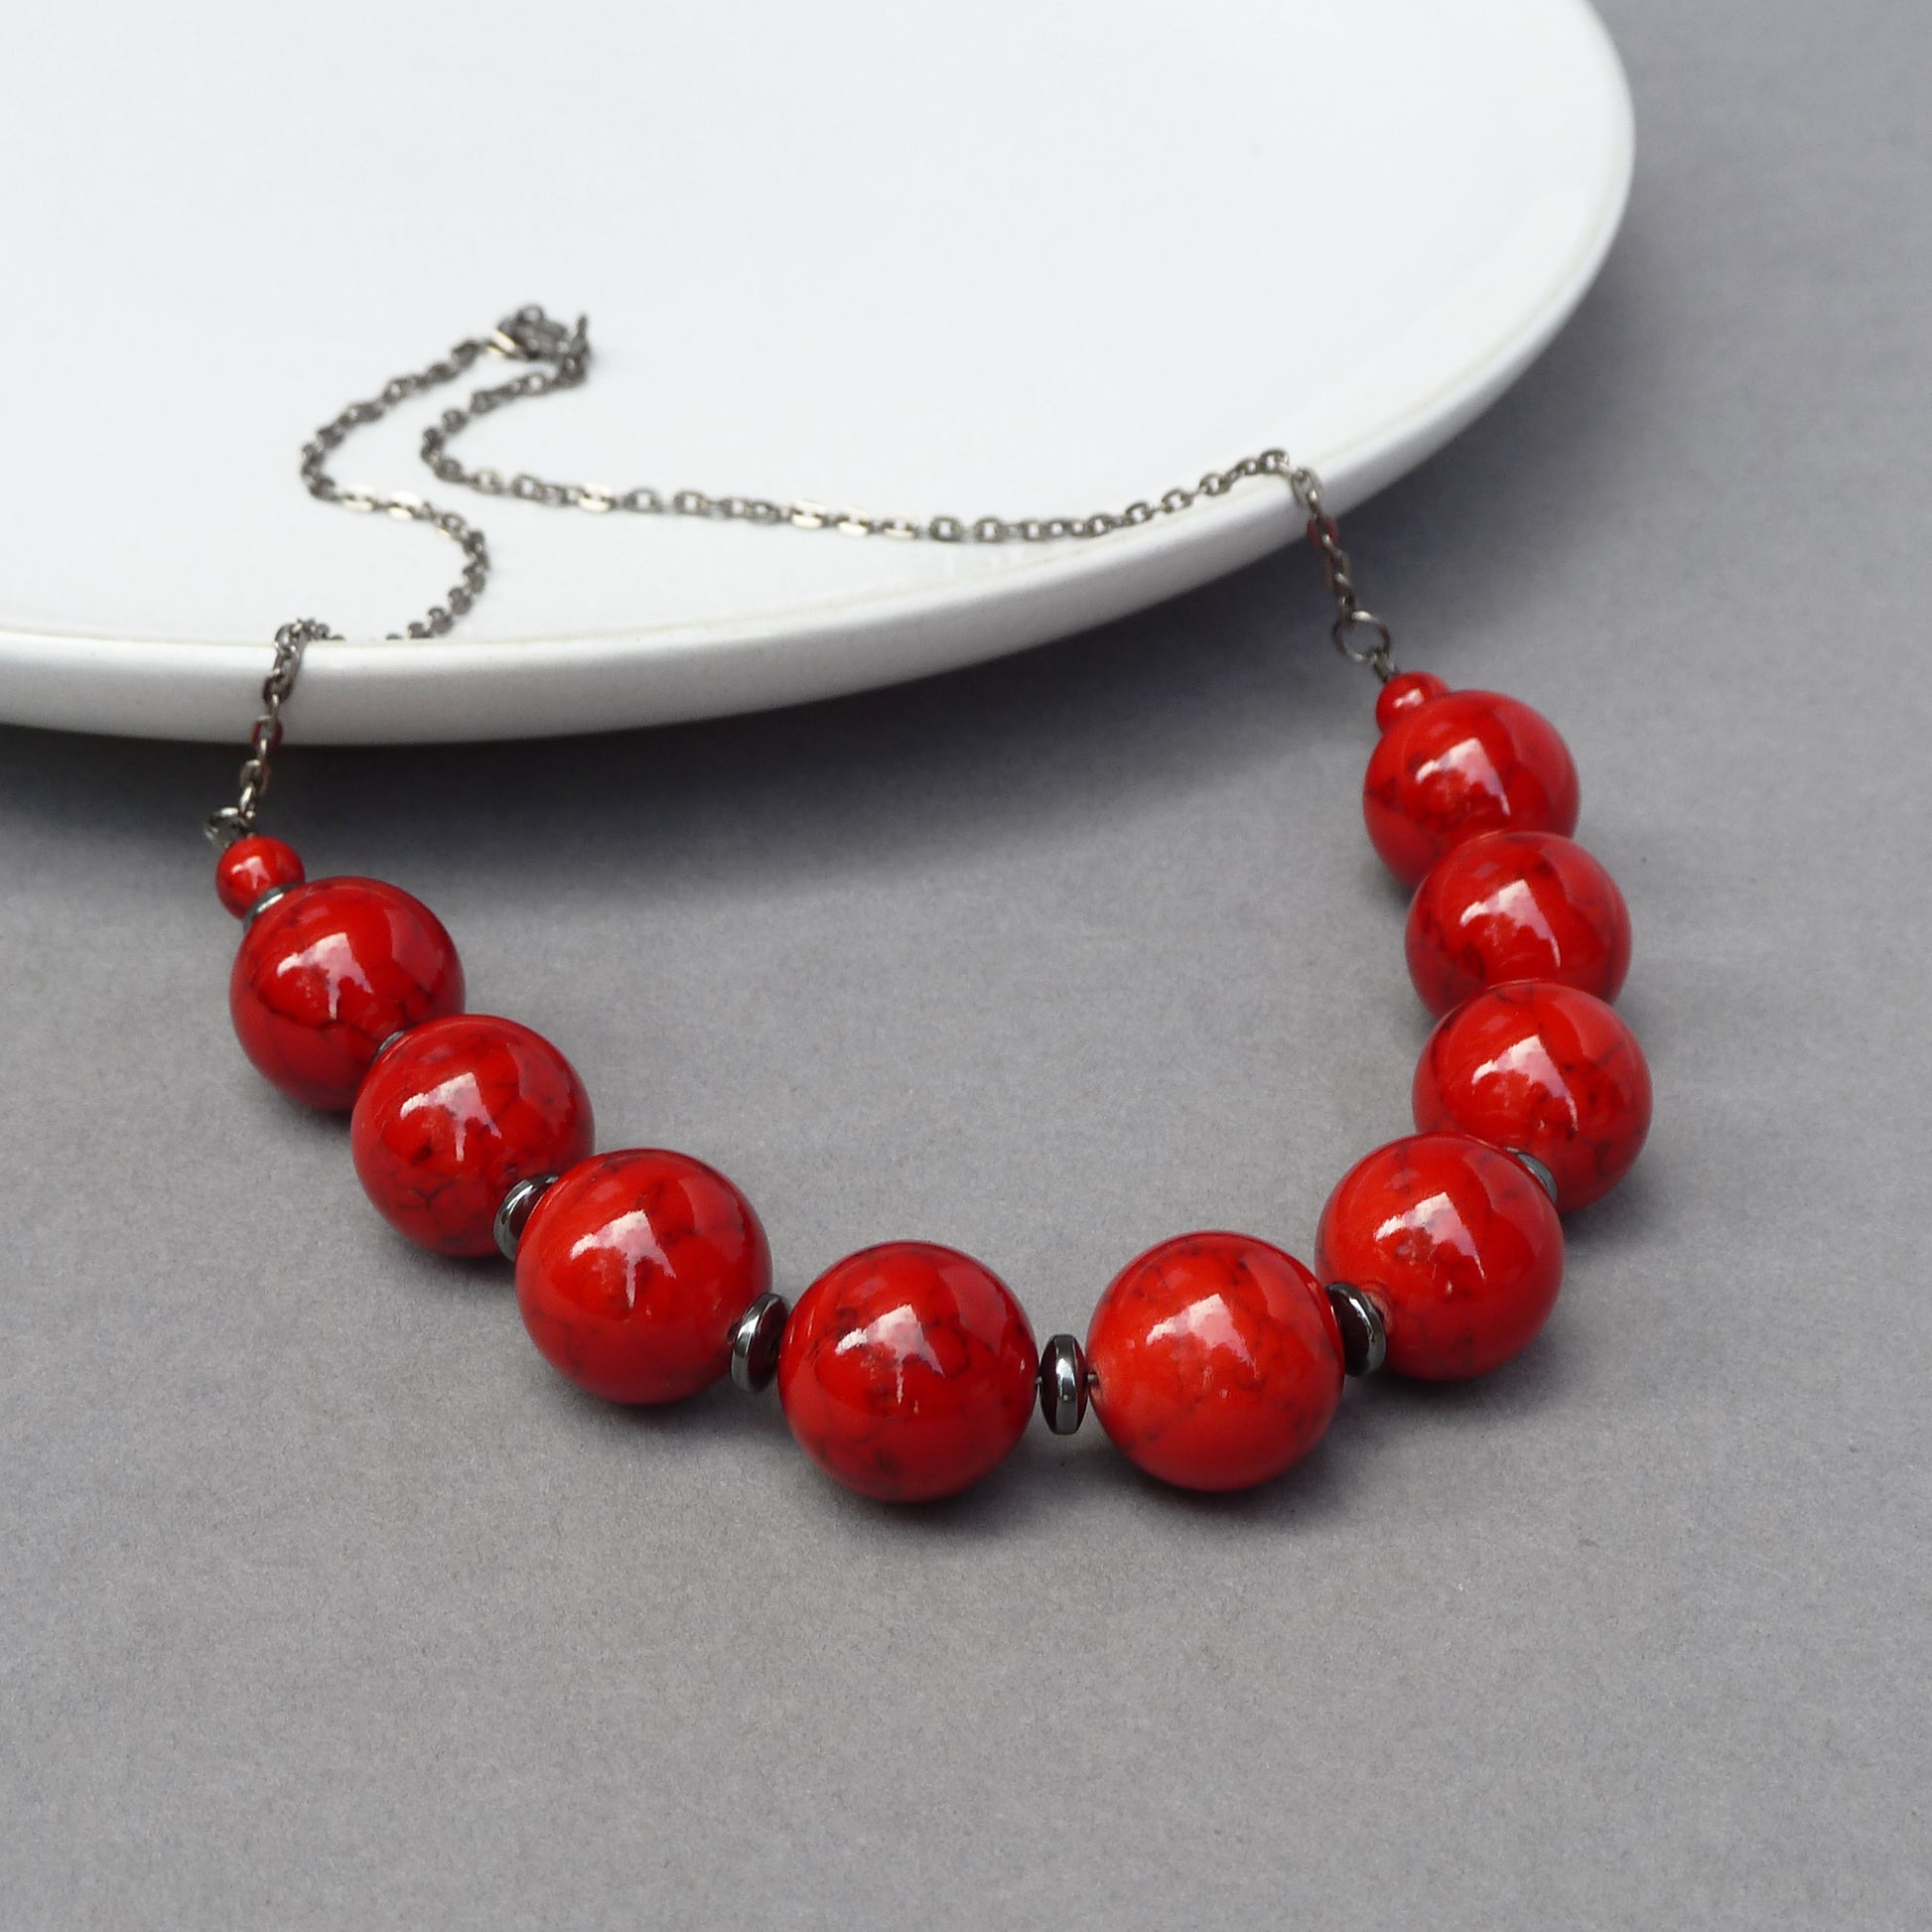 Bright red stone necklace